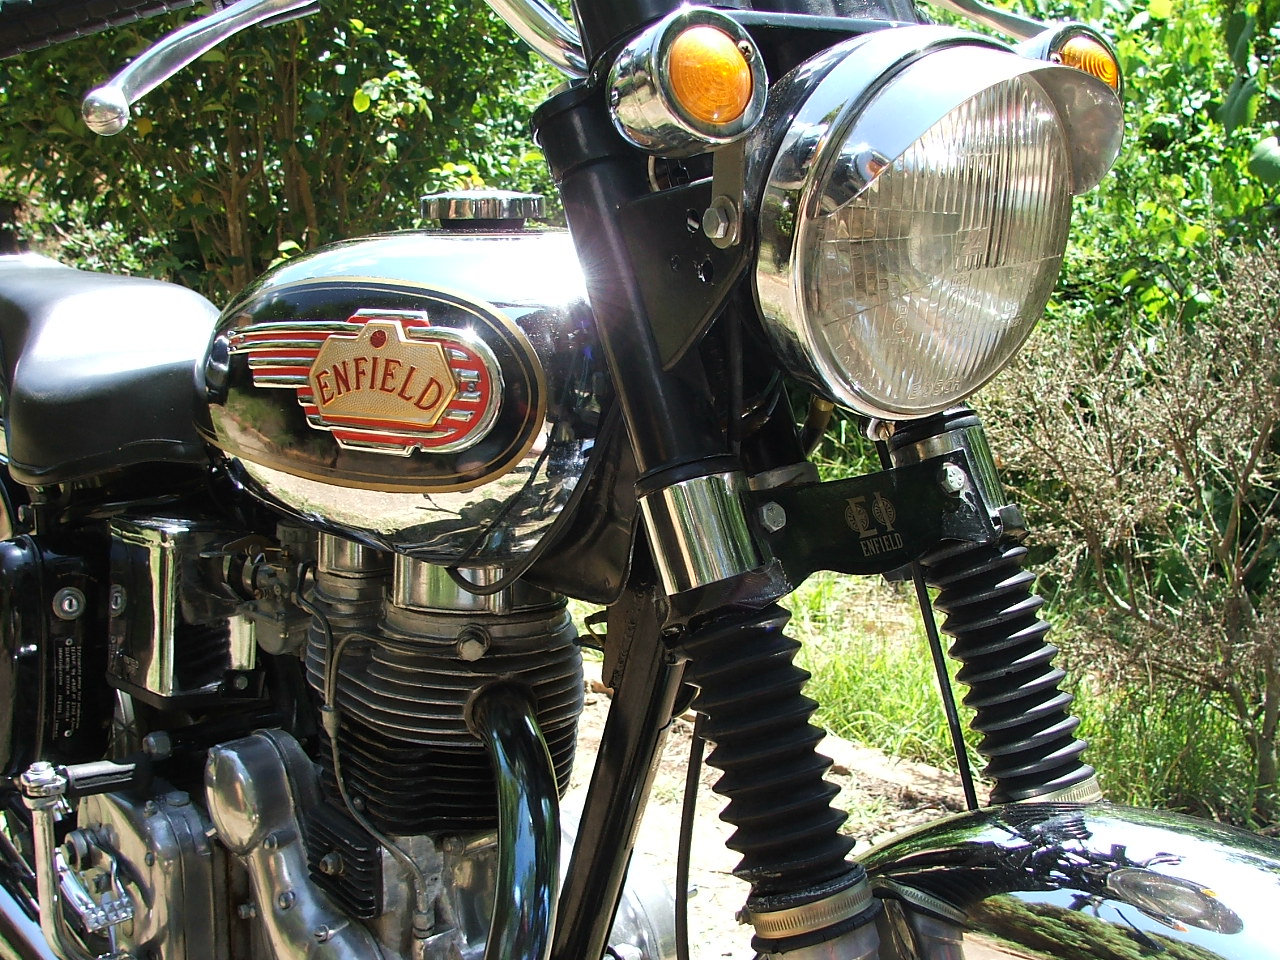 Enfield 350